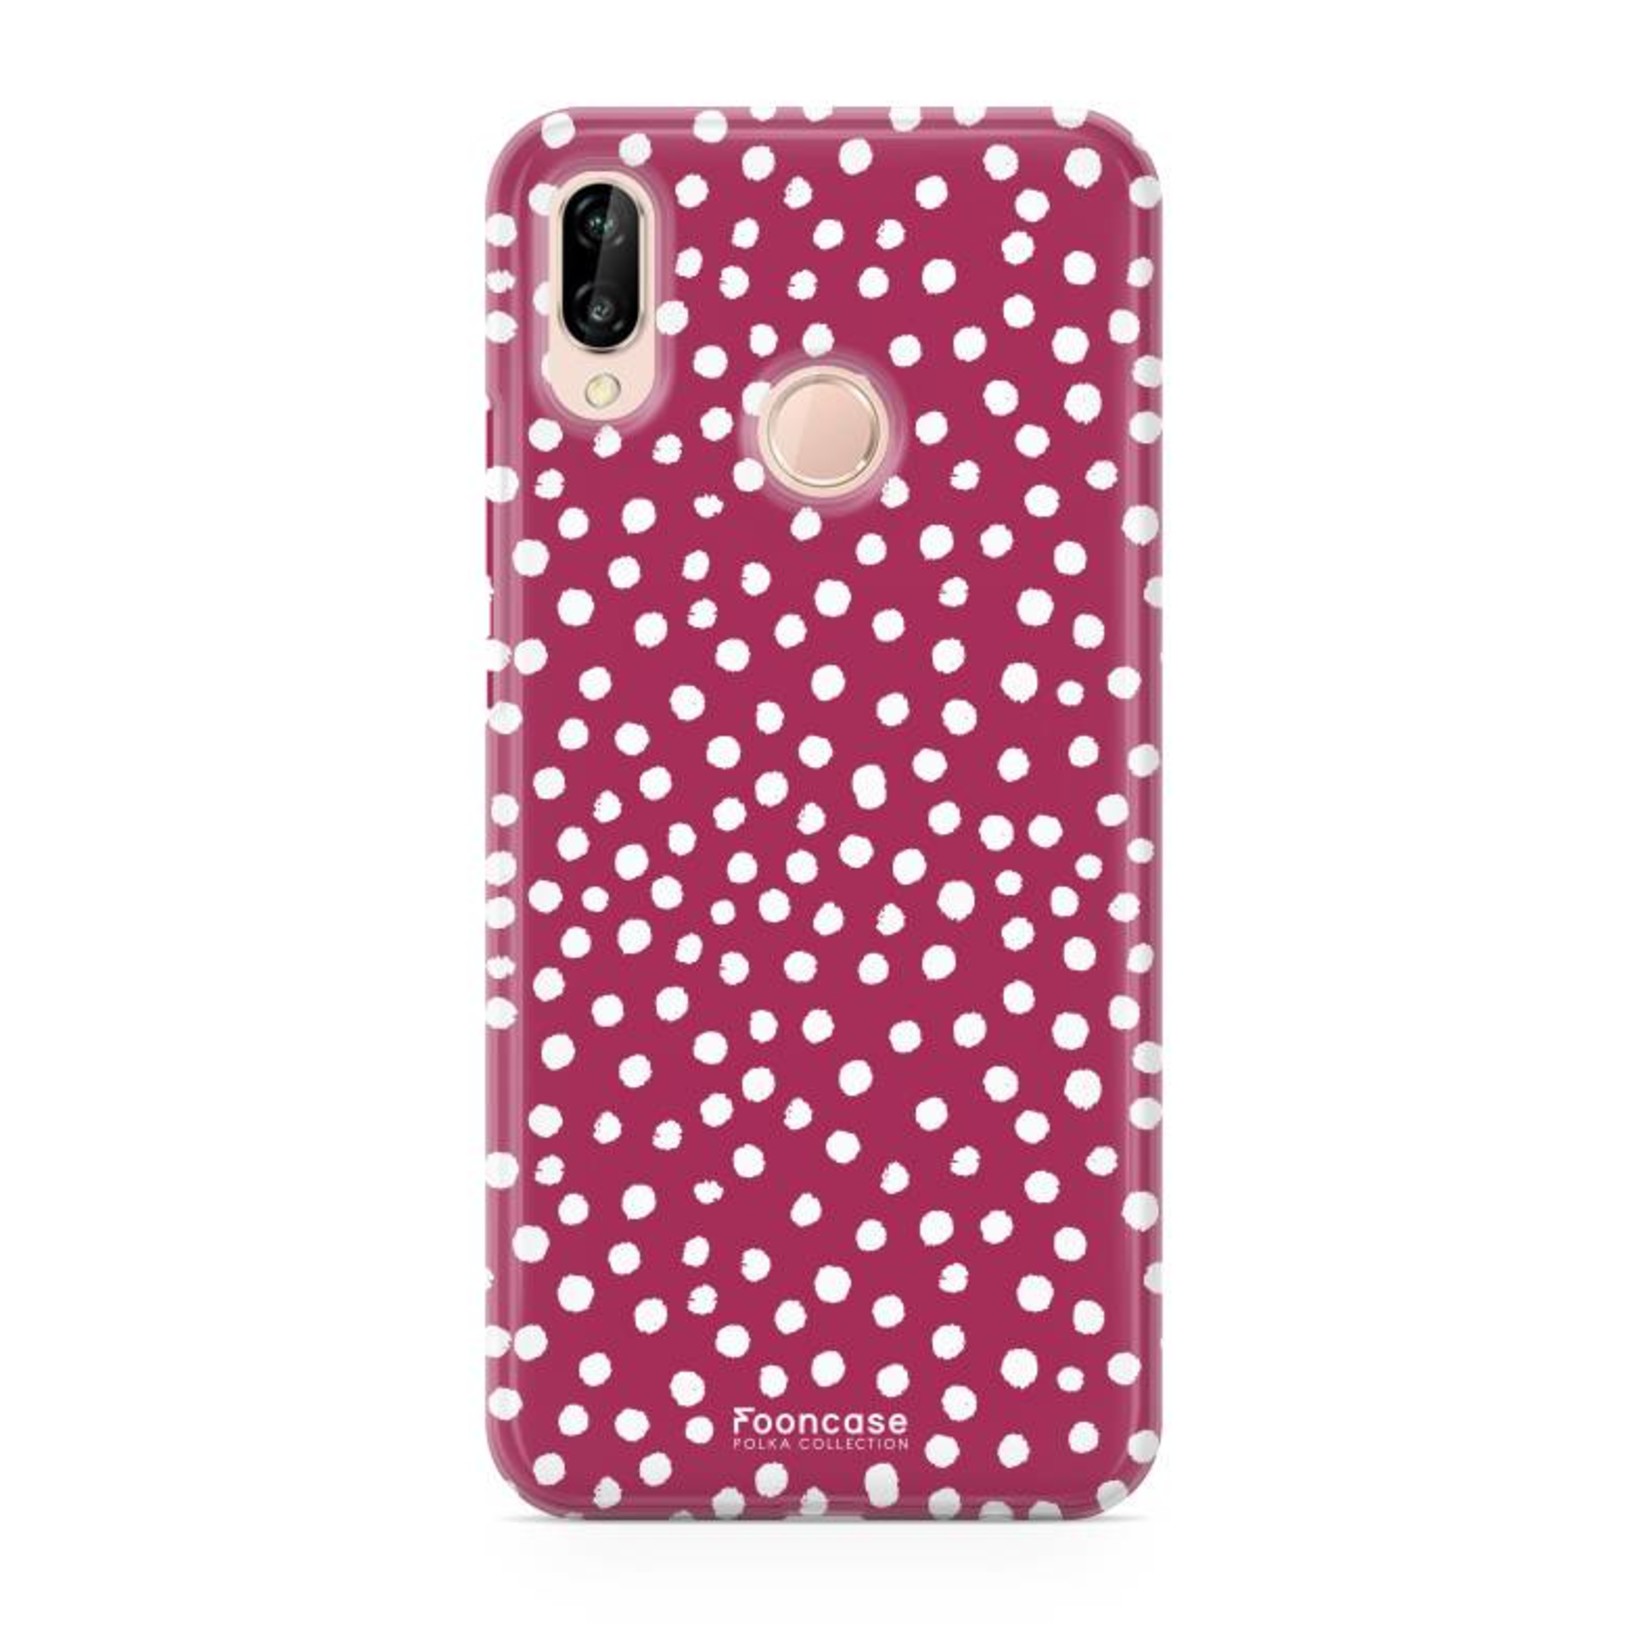 FOONCASE Huawei P20 Lite - POLKA COLLECTION / Rot